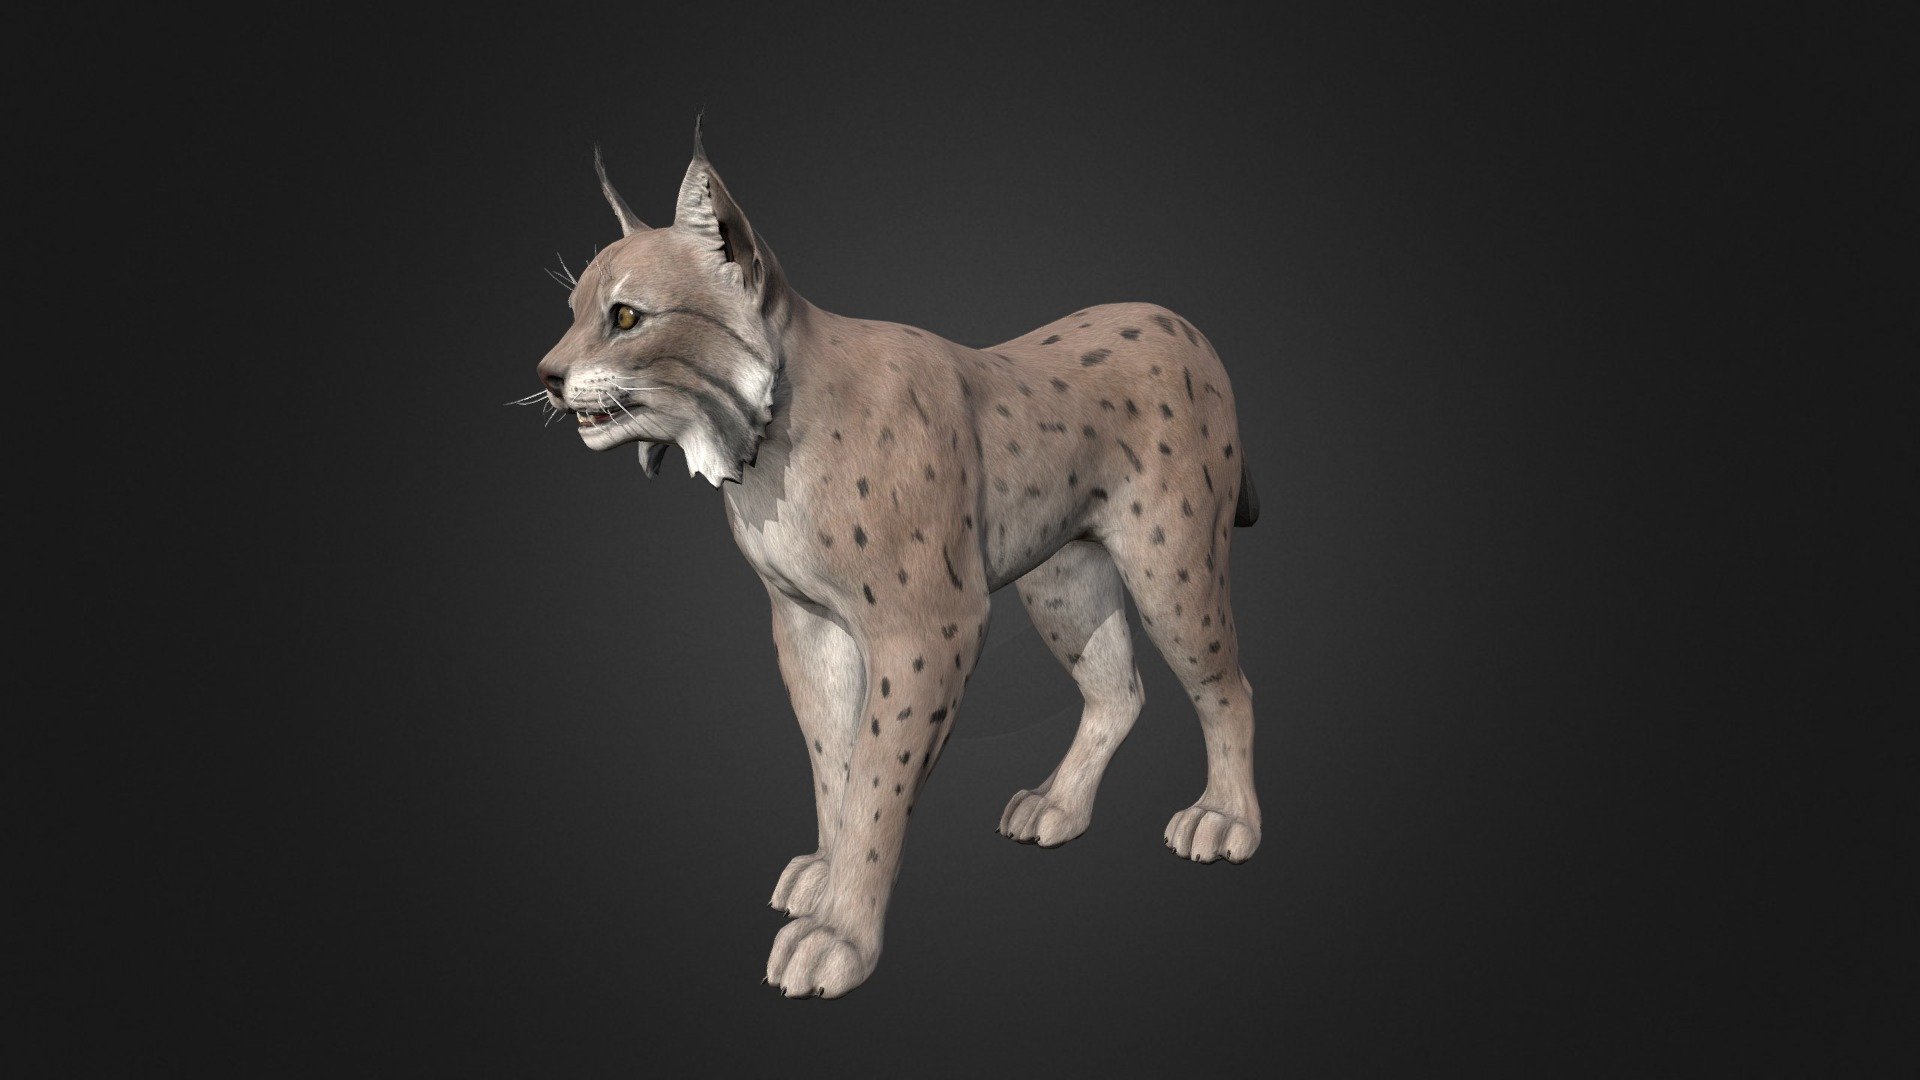 This asset has Lynx model.

Model has 4 LOD.


23550 tris
16450 tris
9900 tris
6350 tris

Diffuse, normal and metallic / roughness maps (all maps 2048x2048).

76 animations (IP/RM)

Attack(1-3), walk (F,FL,FR,B,BL,BR), Run (F,FL,FR), Run_Jump, Trot (F,FL,FR), Swim (F,FL,FR,B,BL,BR), Swim_Idle, Swim_turn(Left/Right), Jump_In_Place, Jump_F, Jump (start/landing), Jump_Loop (up, horisontal, down),Hit (F,M,B) , Lie (Start/end), Lie_Idle 1-3, Sleep (start, idle, end), Idle 1-3, death, eat, turn (left/right) etc.

If you have any questions, please contact us by mail: Chester9292@mail.ru - Lynx - Buy Royalty Free 3D model by Darina3D 3d model